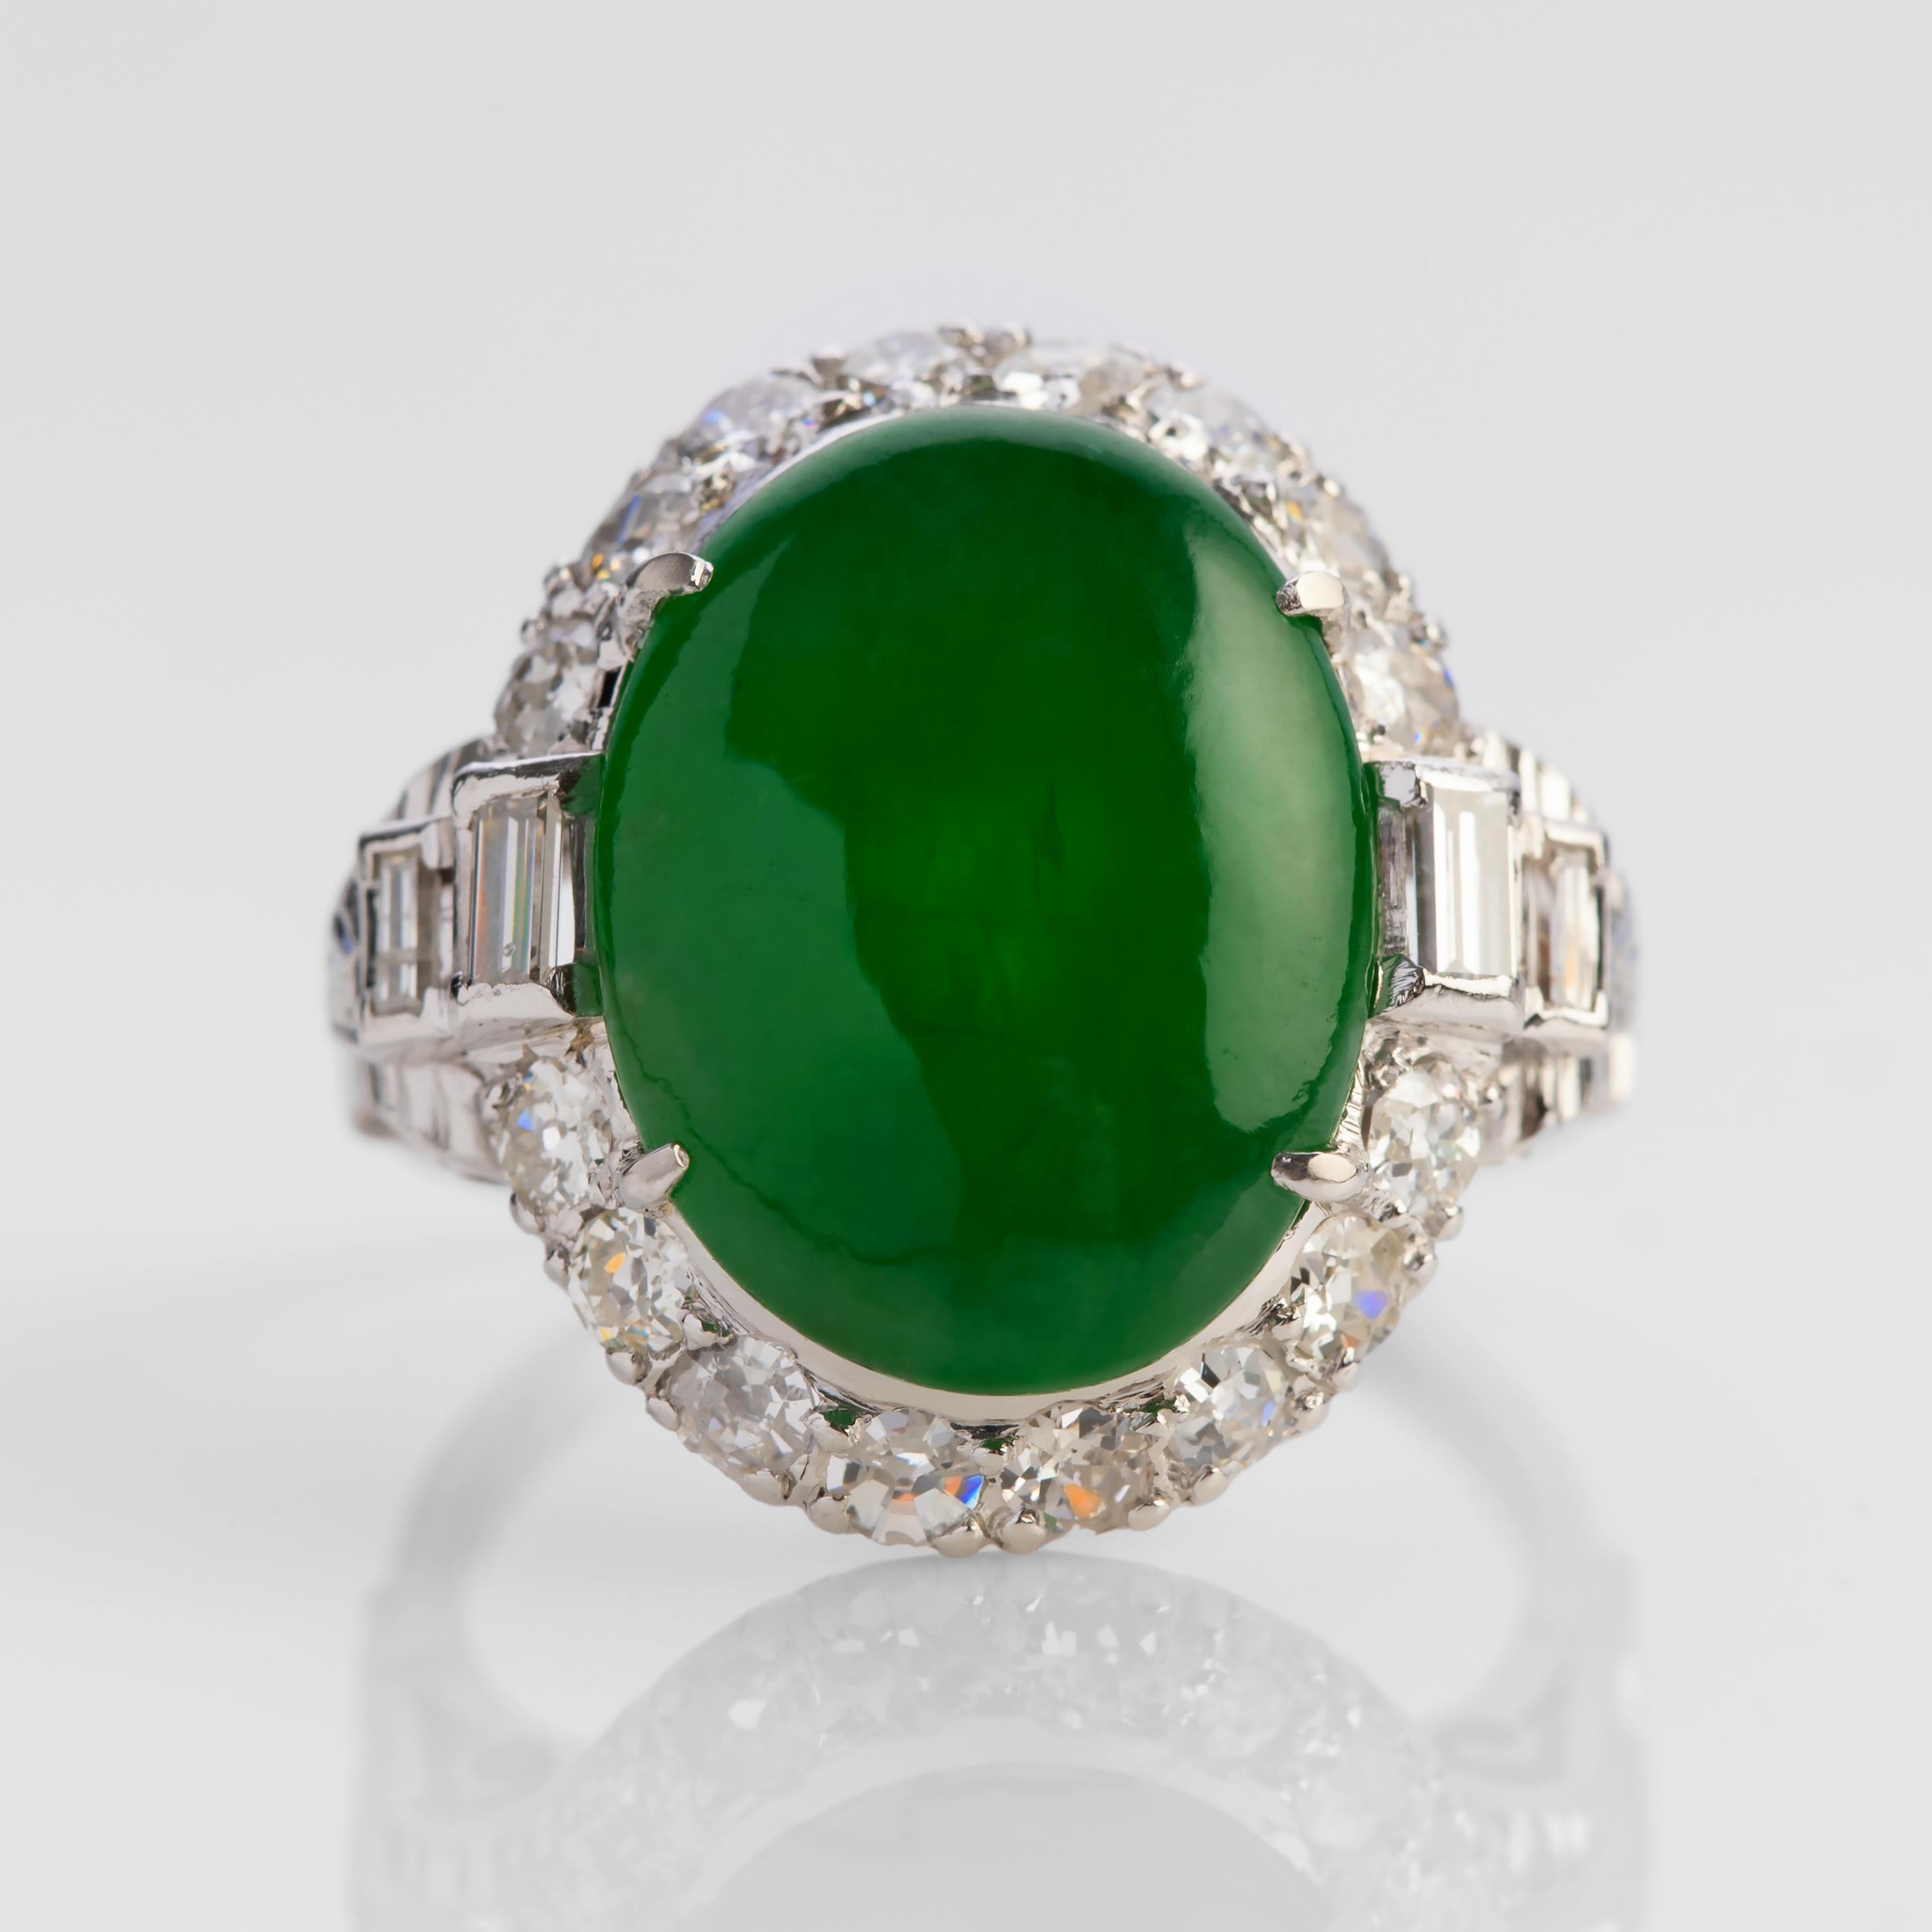 The brilliant, hypnotically mesmerizing rich emerald-green jadeite jade cabochon you see here represents the very top quality in jade. GIA certified to be 100% natural and untreated, the luminous gem resides in a Midcentury setting with Art Deco